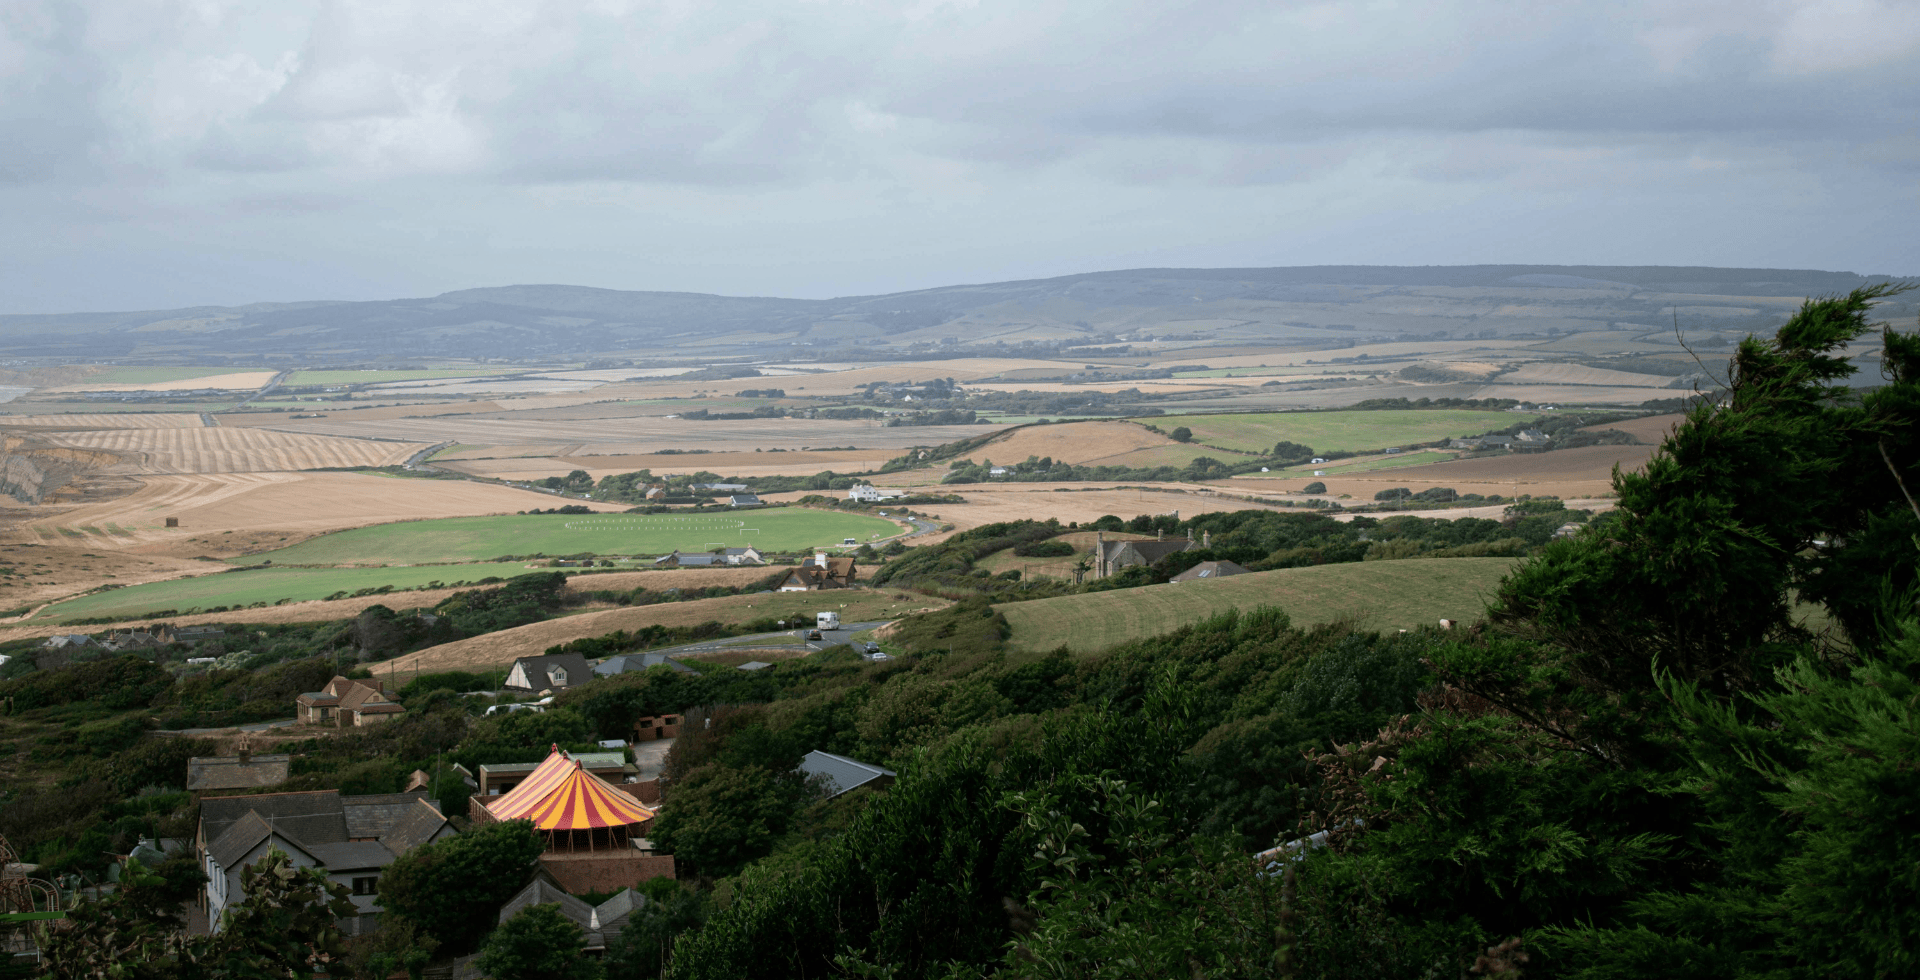 Drone landscape picture of the Isle of Wight. Lush greenery and a small, orange striped circus tent.